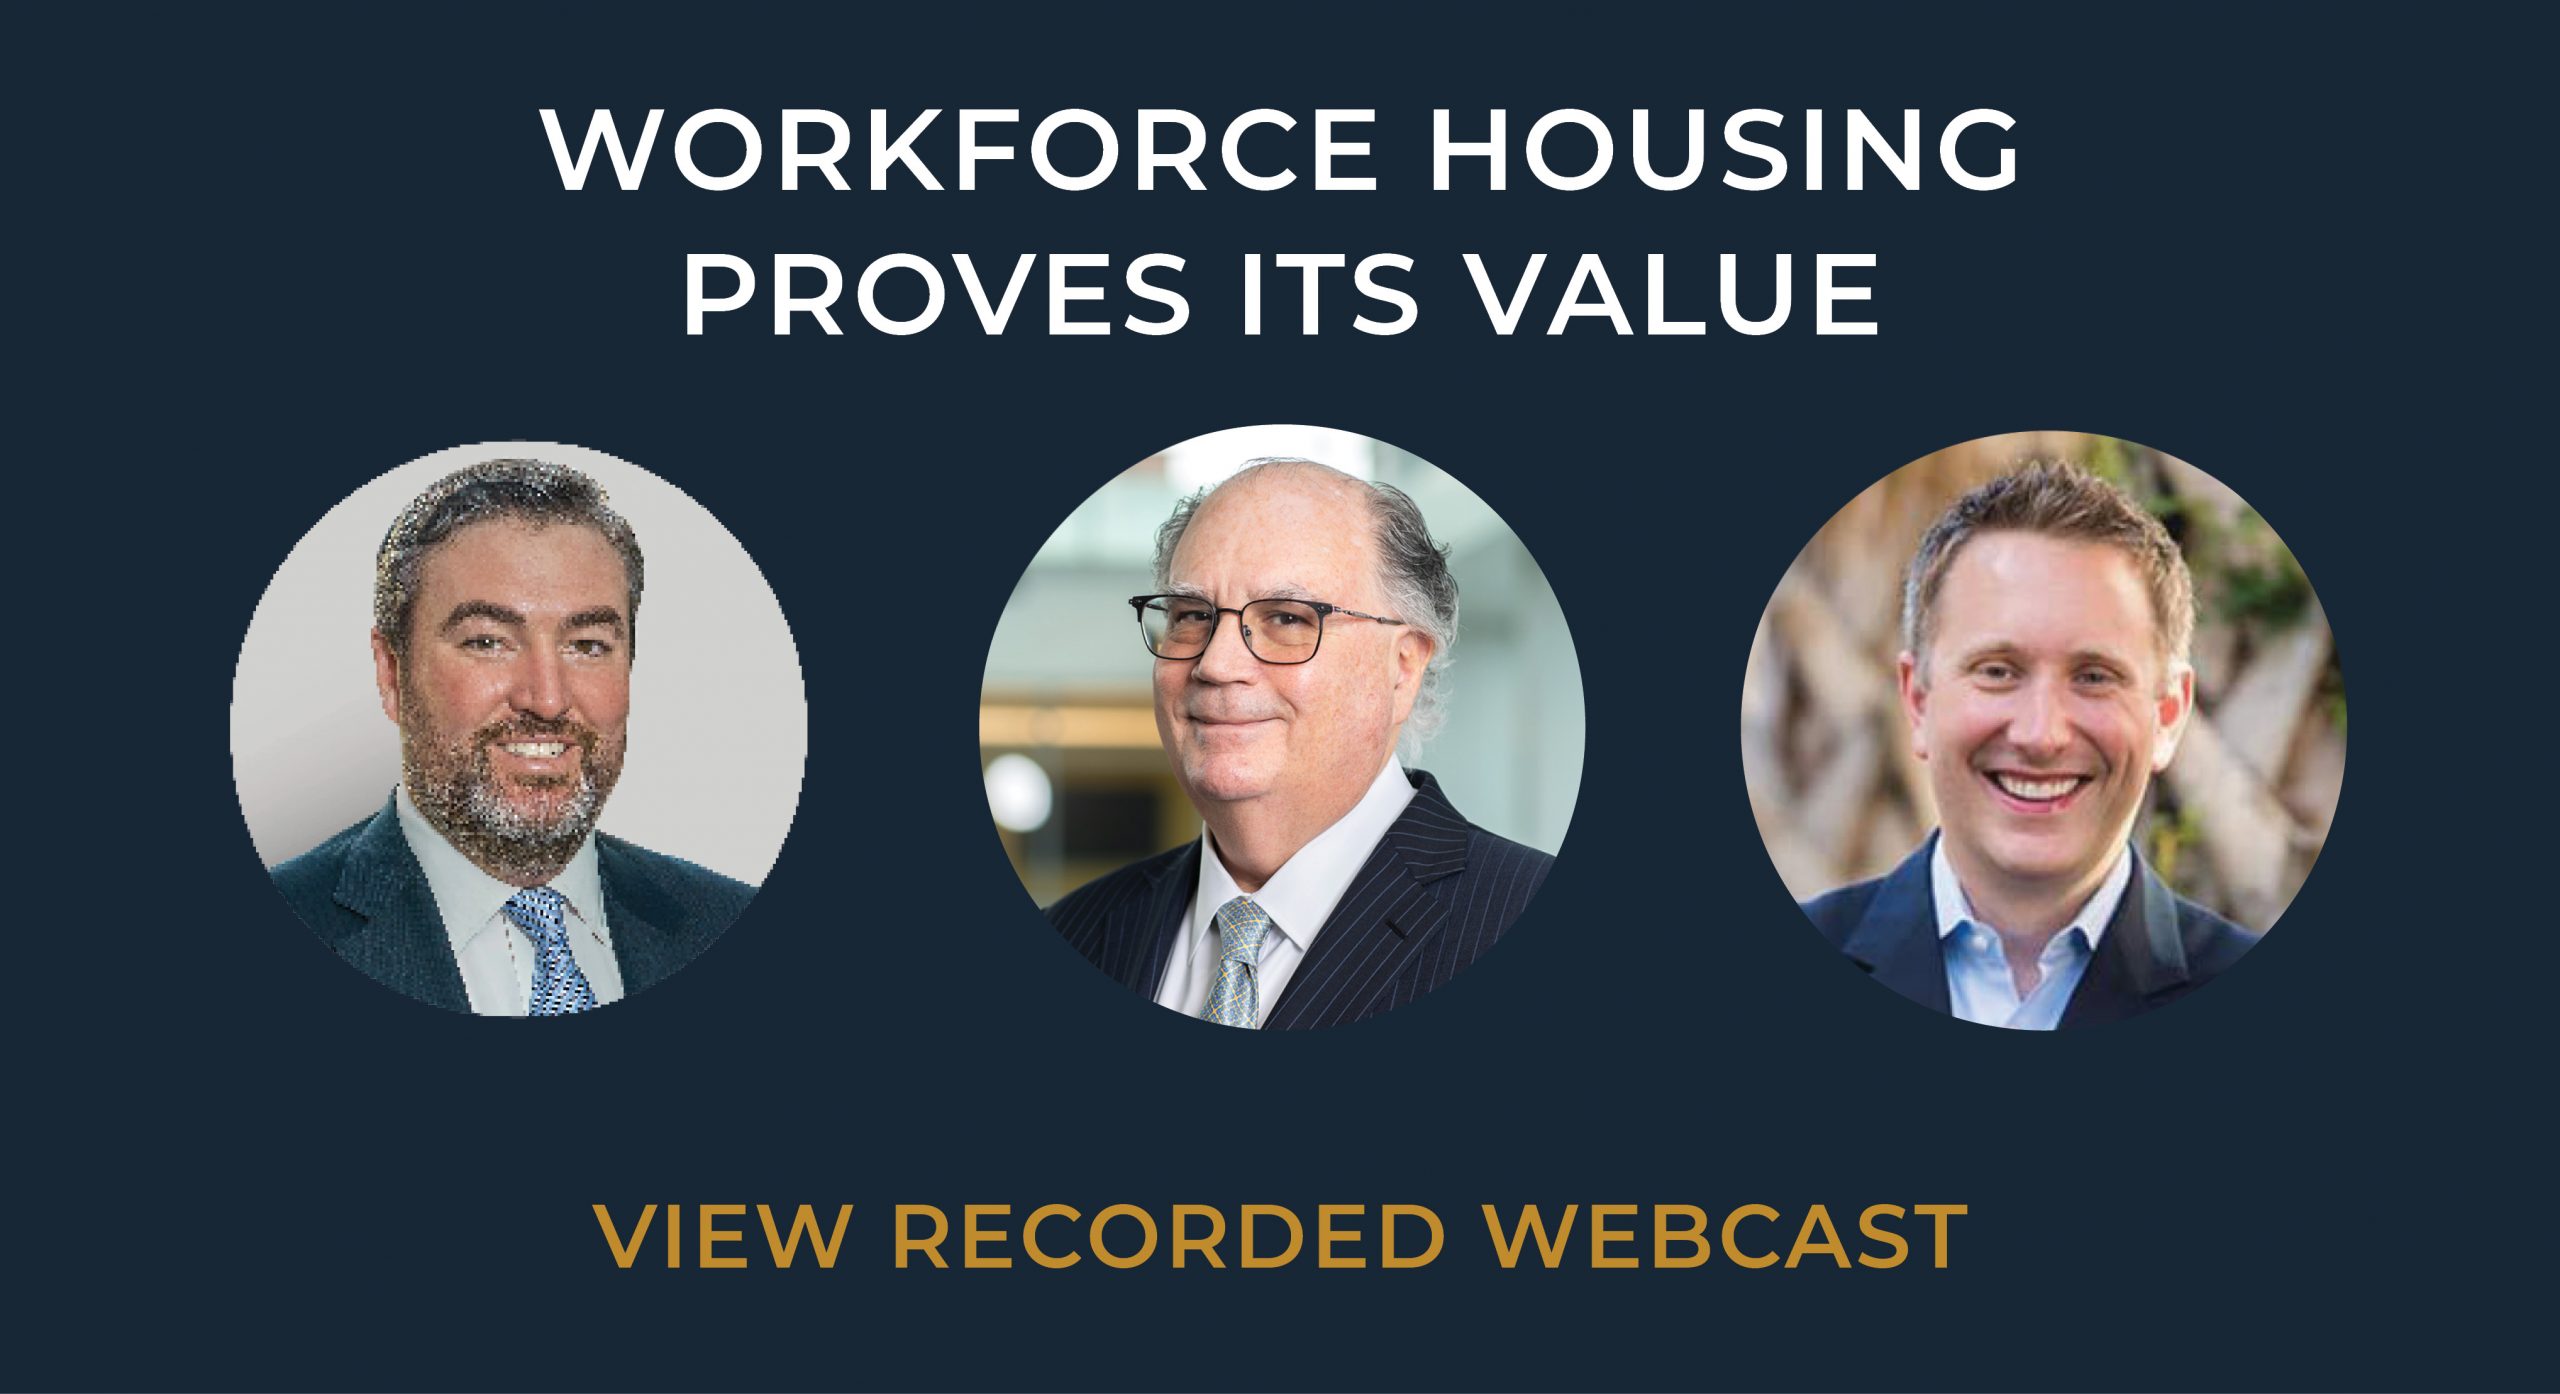 Webcast Recording: Workforce Housing Proves Its Value - Lument In Conversation Workforcehousing Insights Cover 977X532 Scaled